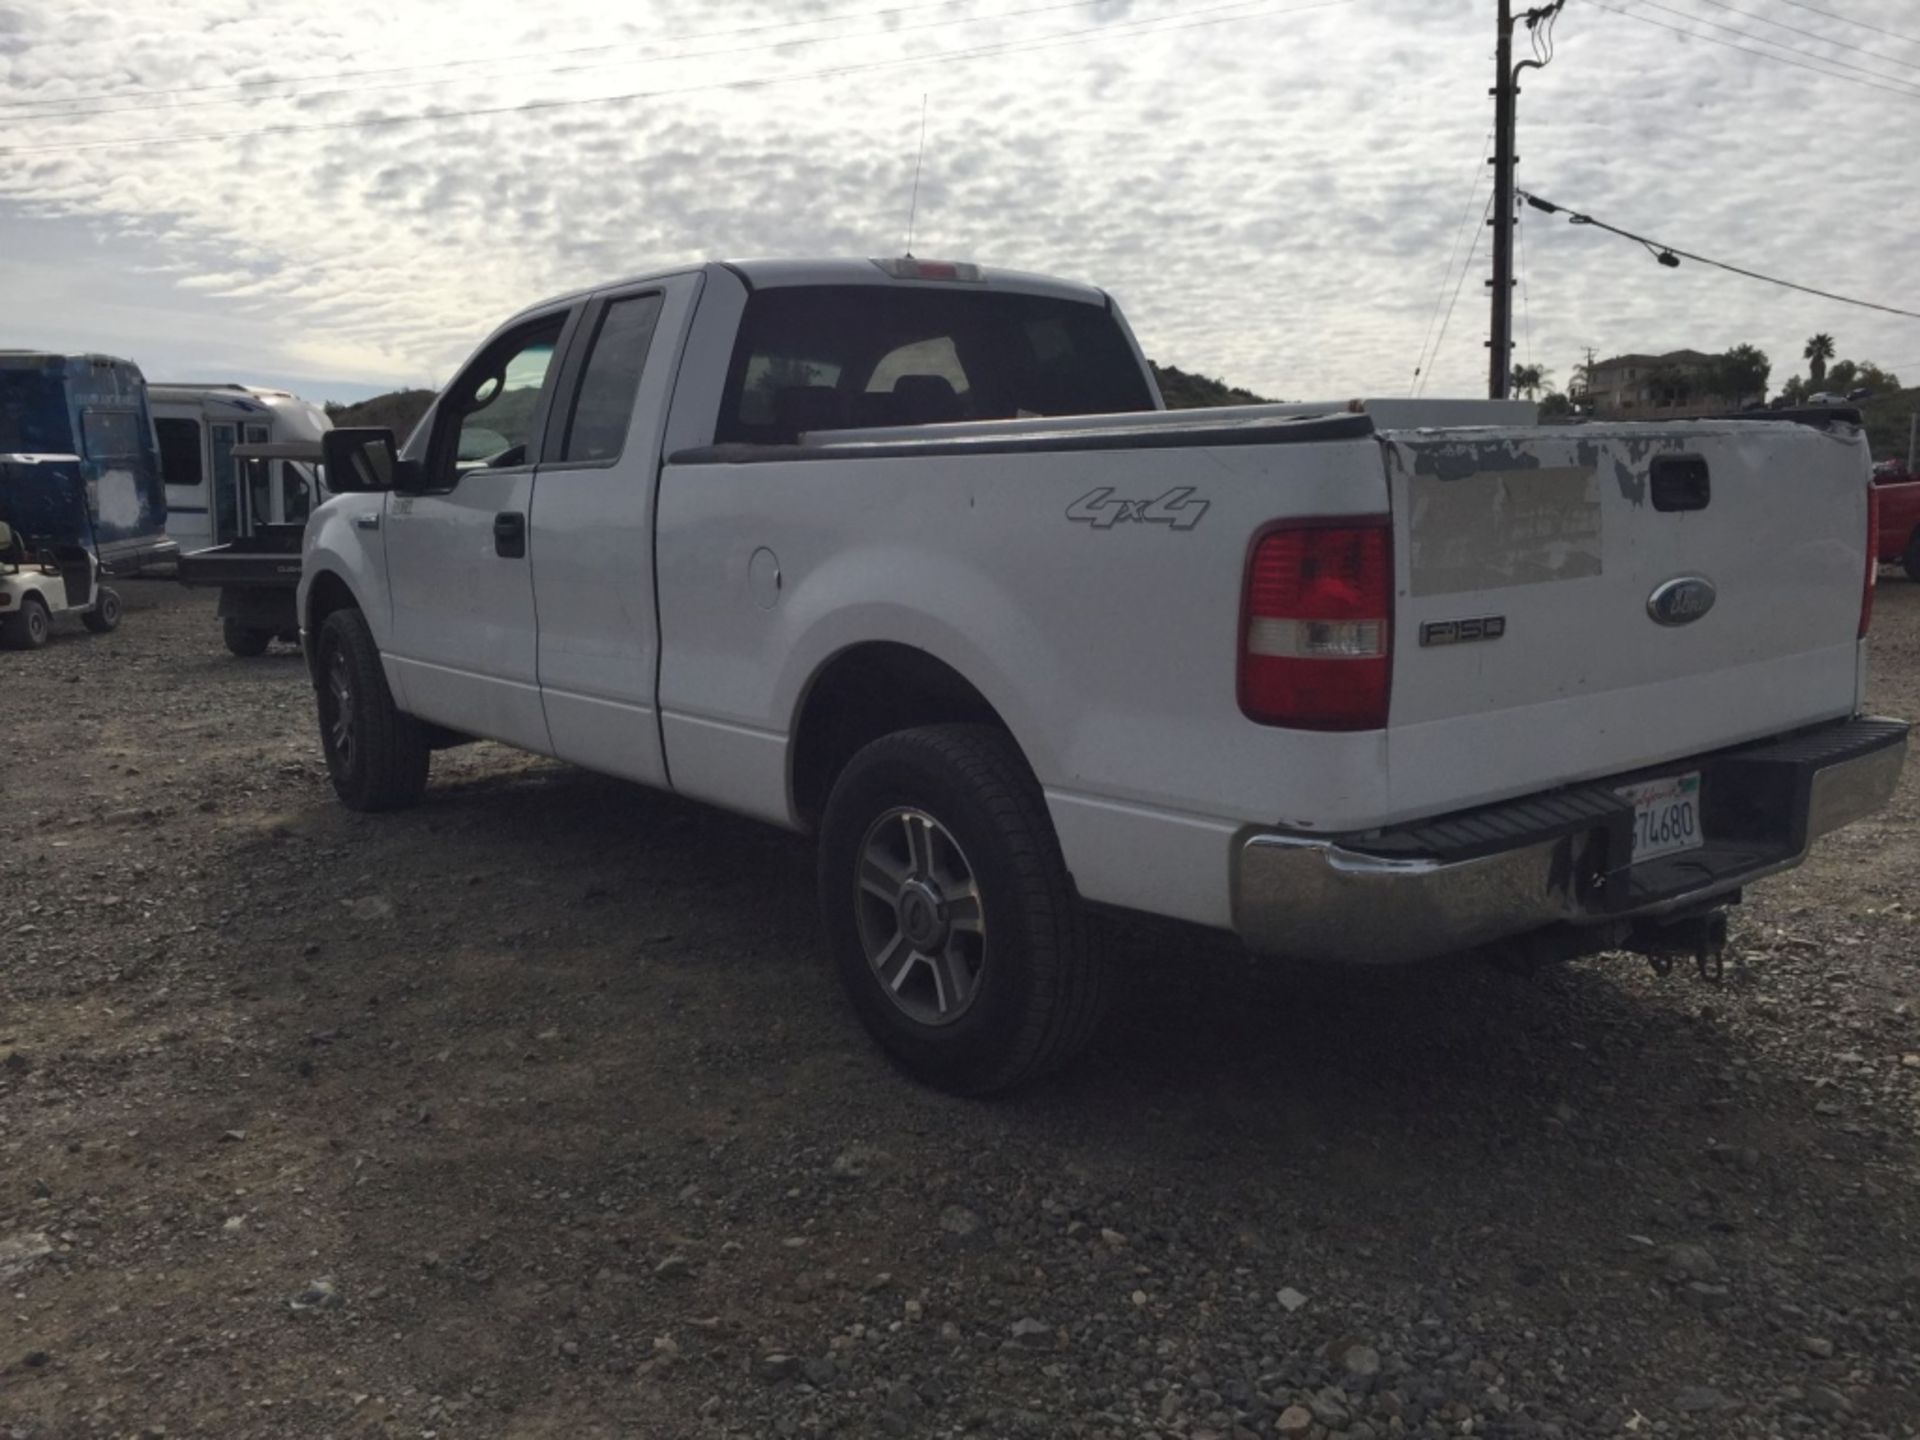 Ford F150 Extended Cab Pickup, - Image 4 of 9